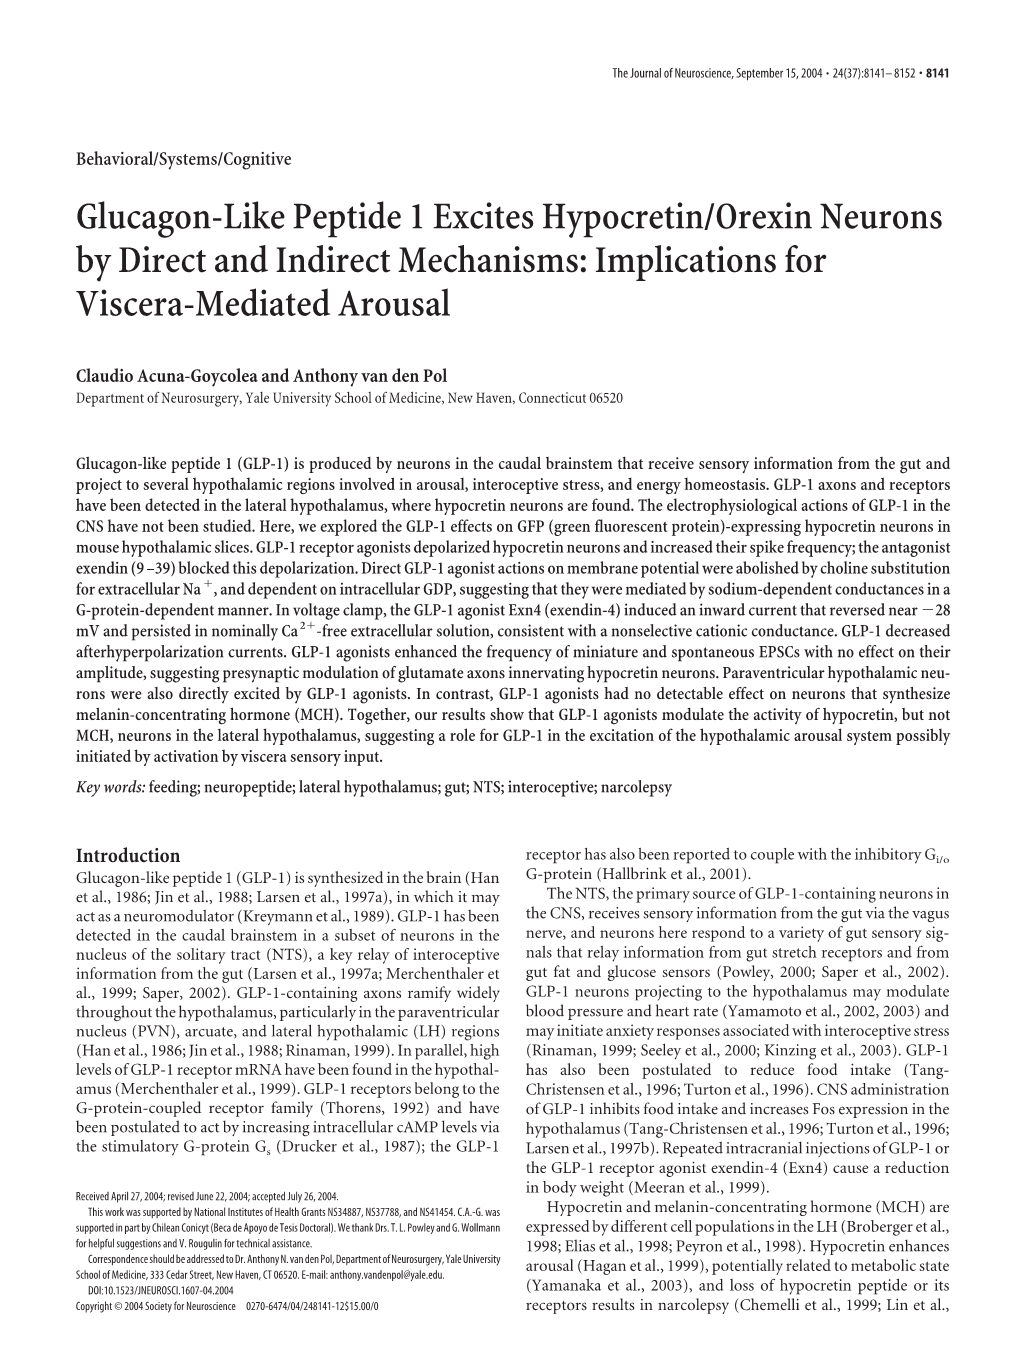 Glucagon-Like Peptide 1 Excites Hypocretin/Orexin Neurons by Direct and Indirect Mechanisms: Implications for Viscera-Mediated Arousal